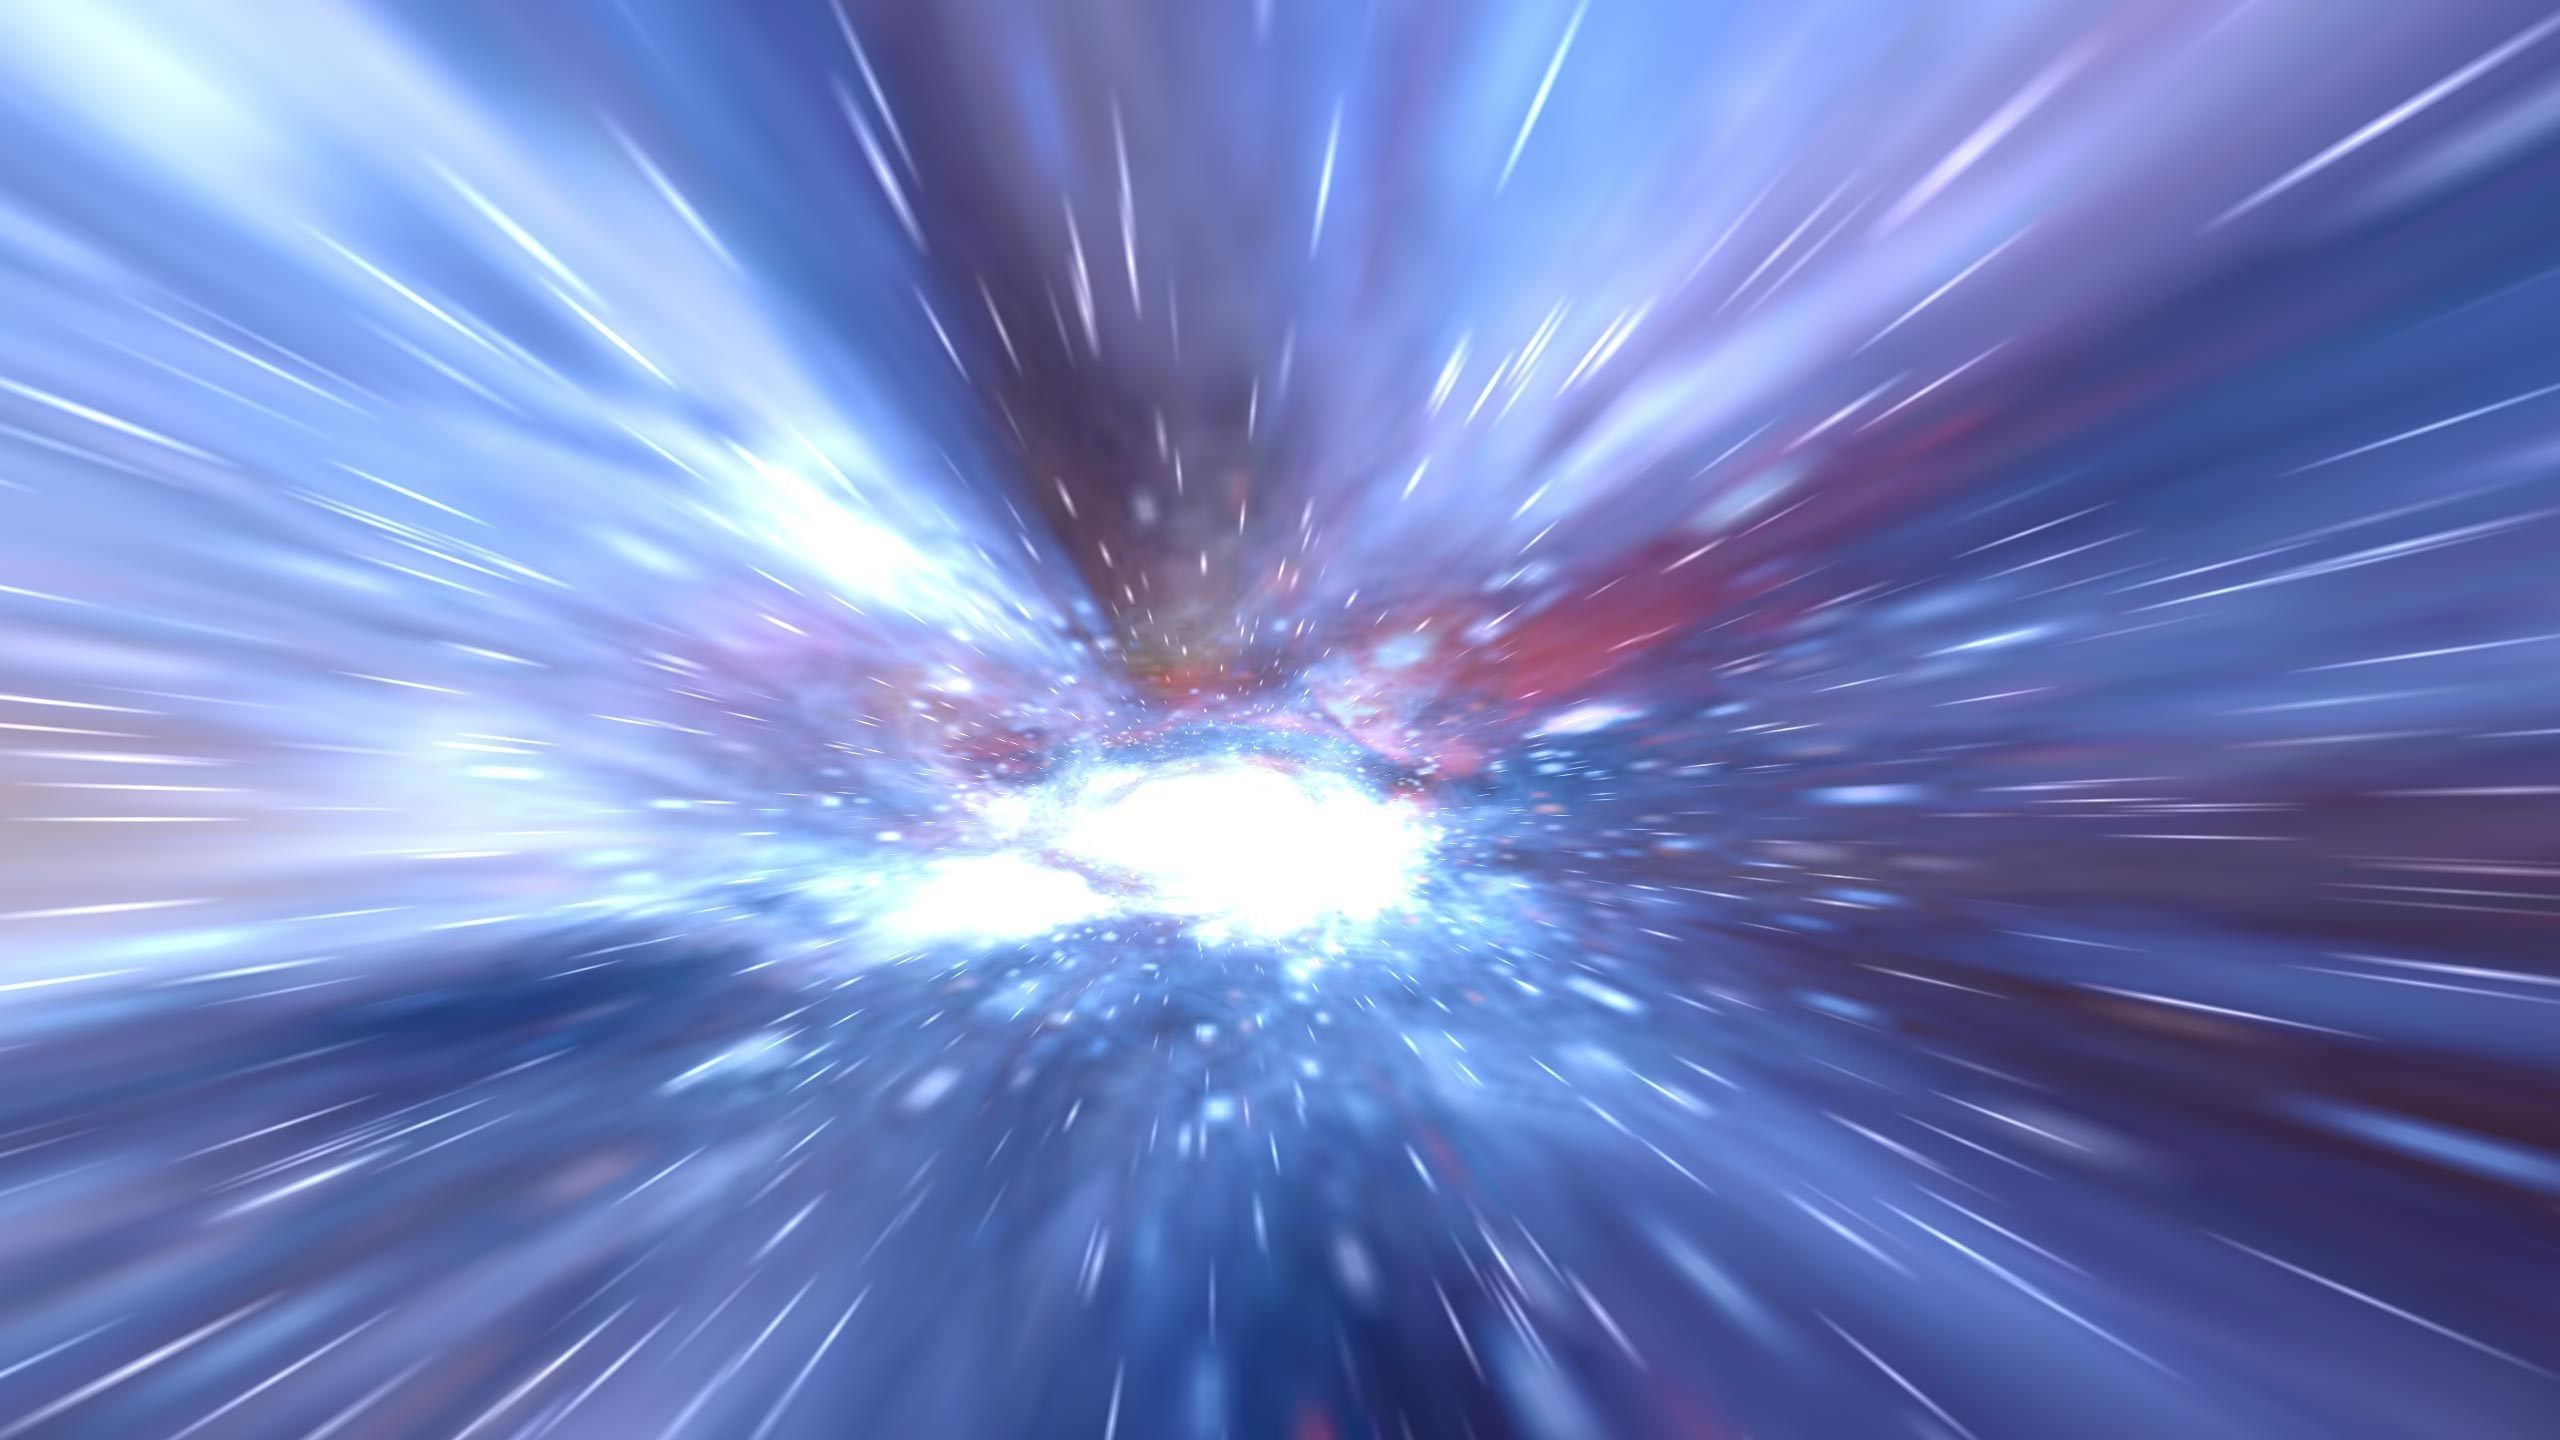 2560x1440, Free Android Hyperspace 3d Live Wallpaper - Hyperspace - HD Wallpaper 